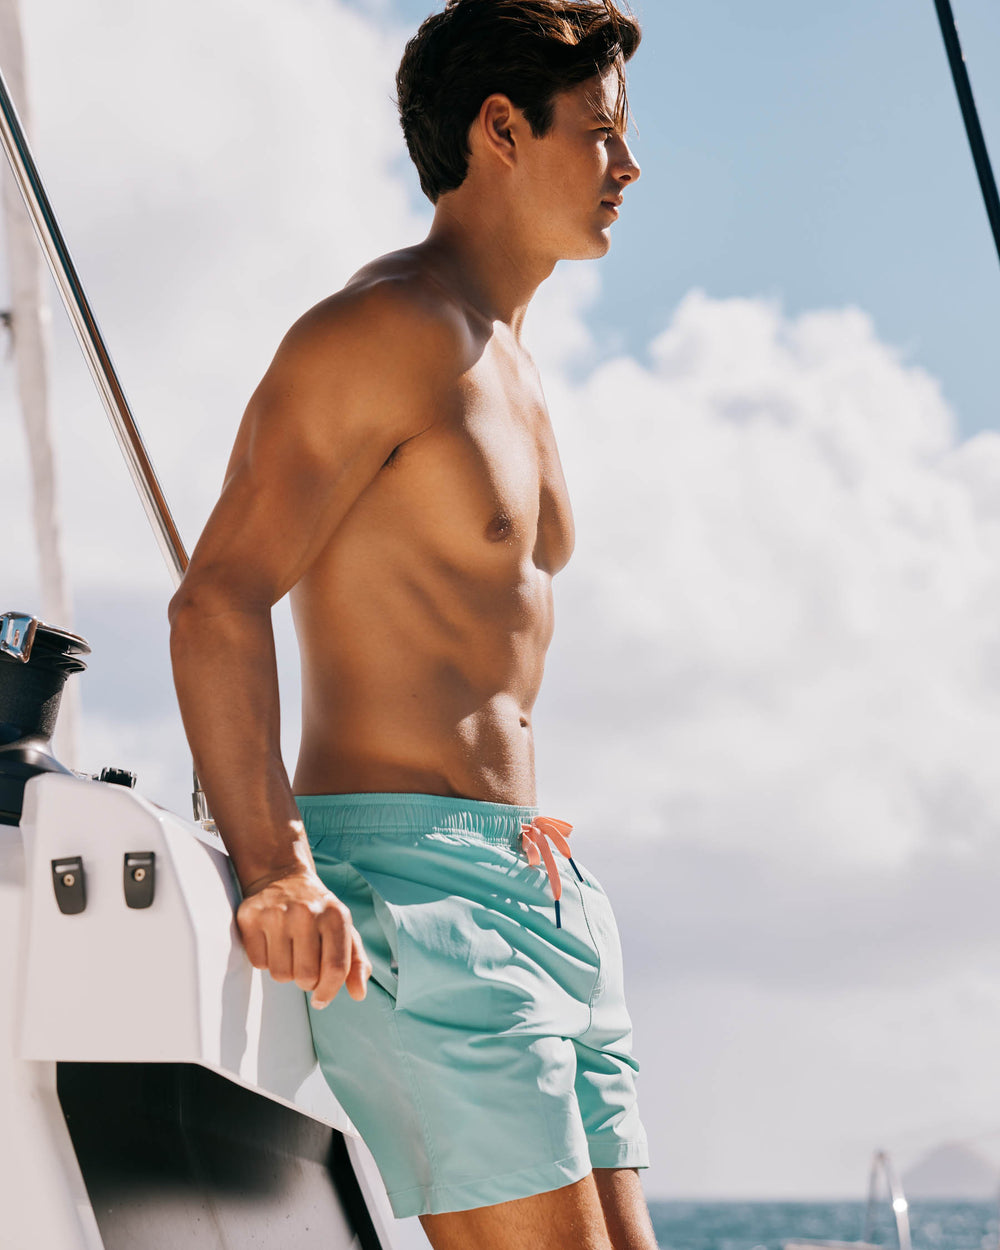 The model lifestyle view of the Men's Solid Swim Trunk by Southern Tide - Isle of Pines